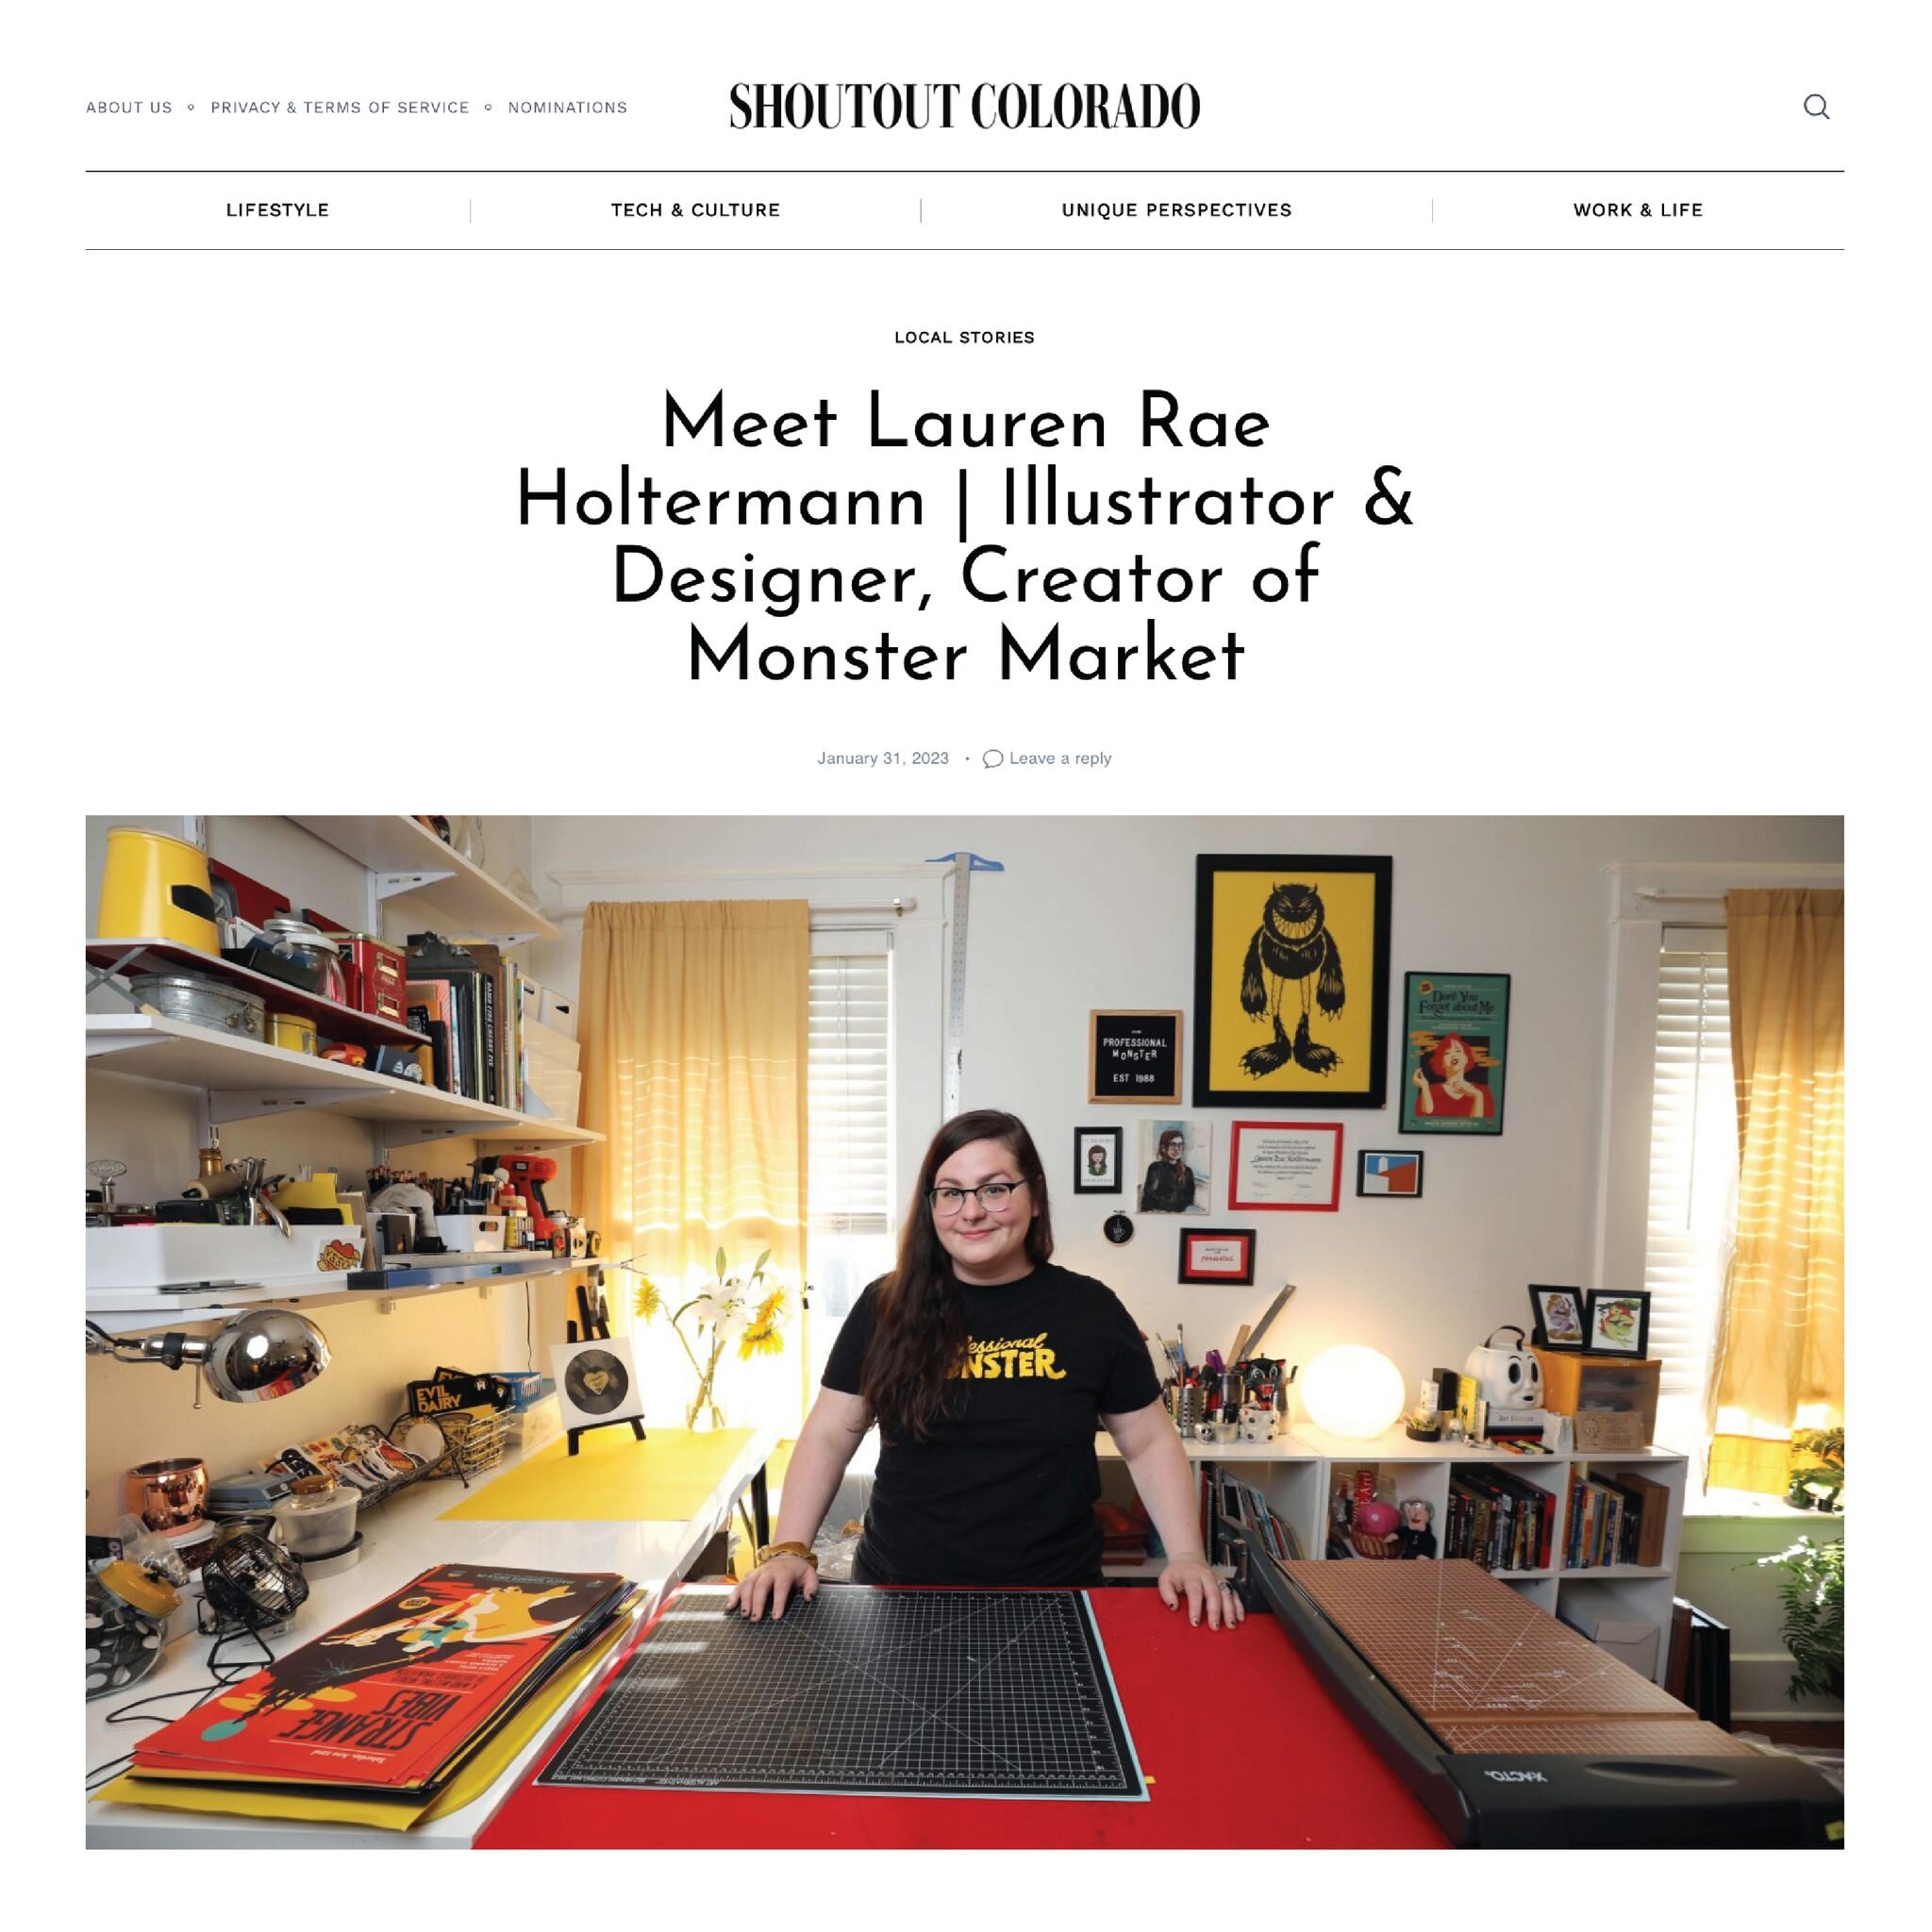 Earlier this year, I had the pleasure of being interviewed by Shoutout Colorado about my journey creating Monster Market! This sweet little spotlight was part of an article on small business owners and their inspirations.✨ If you're interested in lea